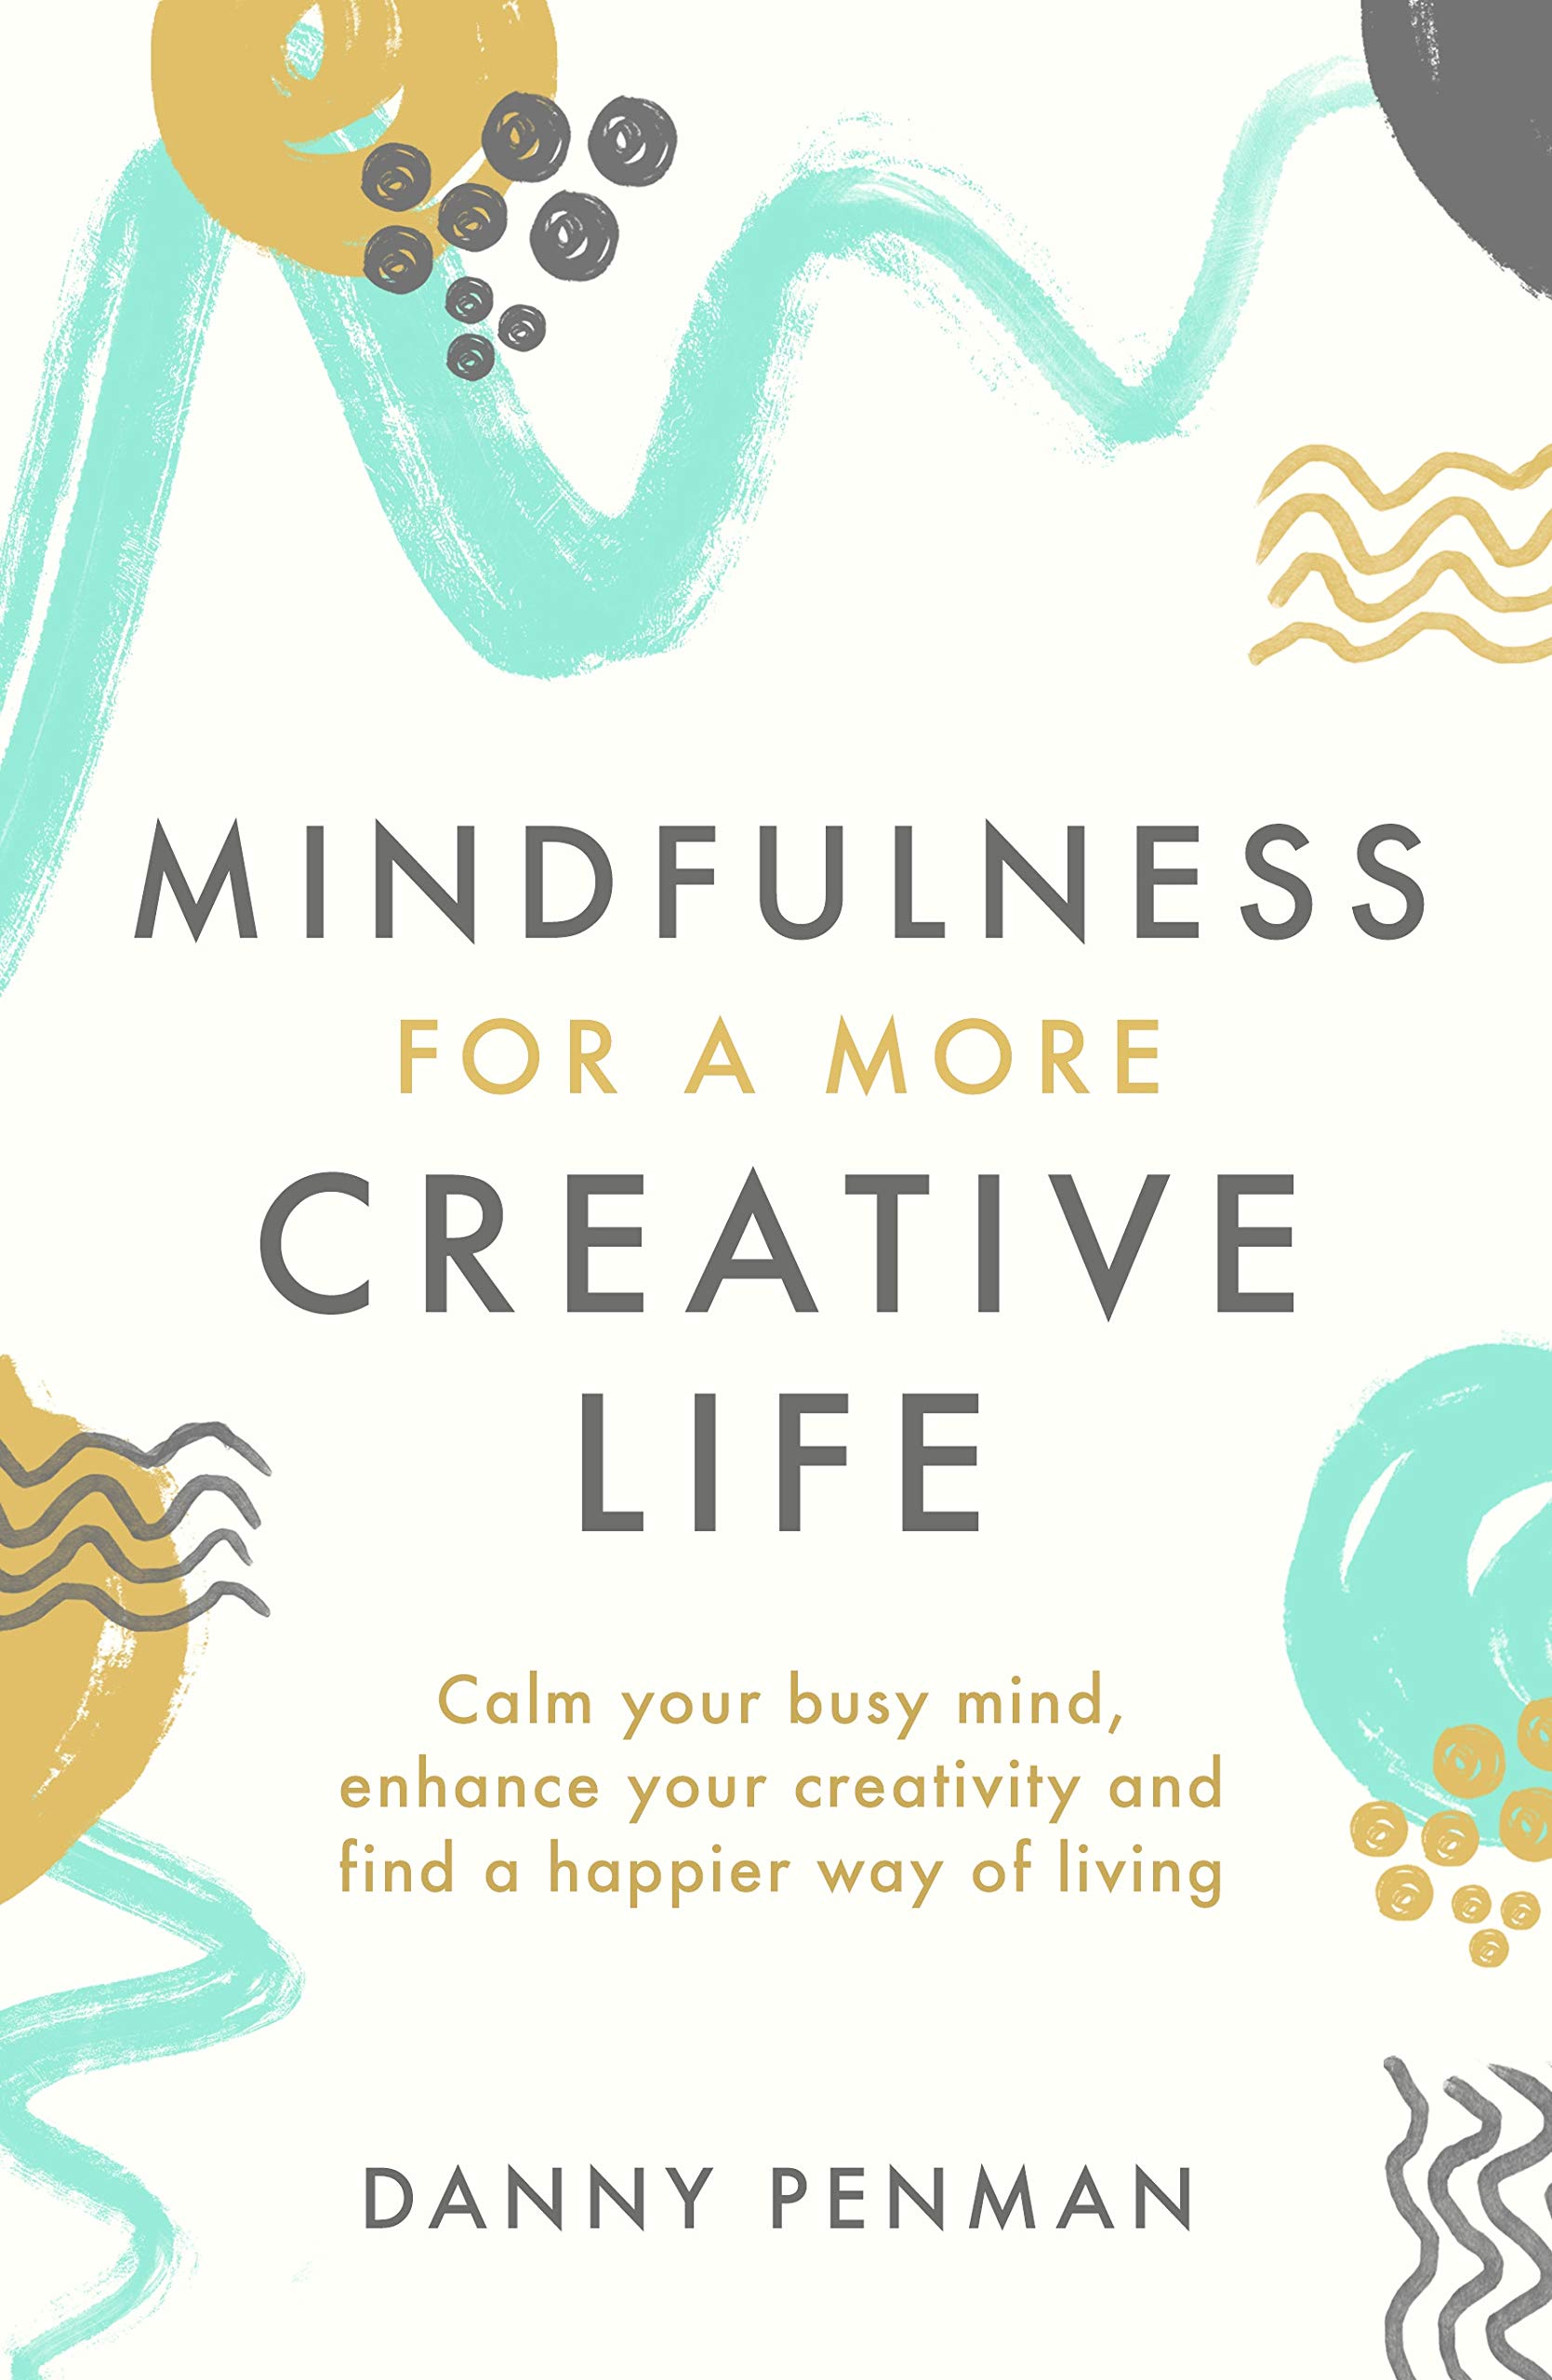 Mindfulness for Creativity | Dr. Danny Penman